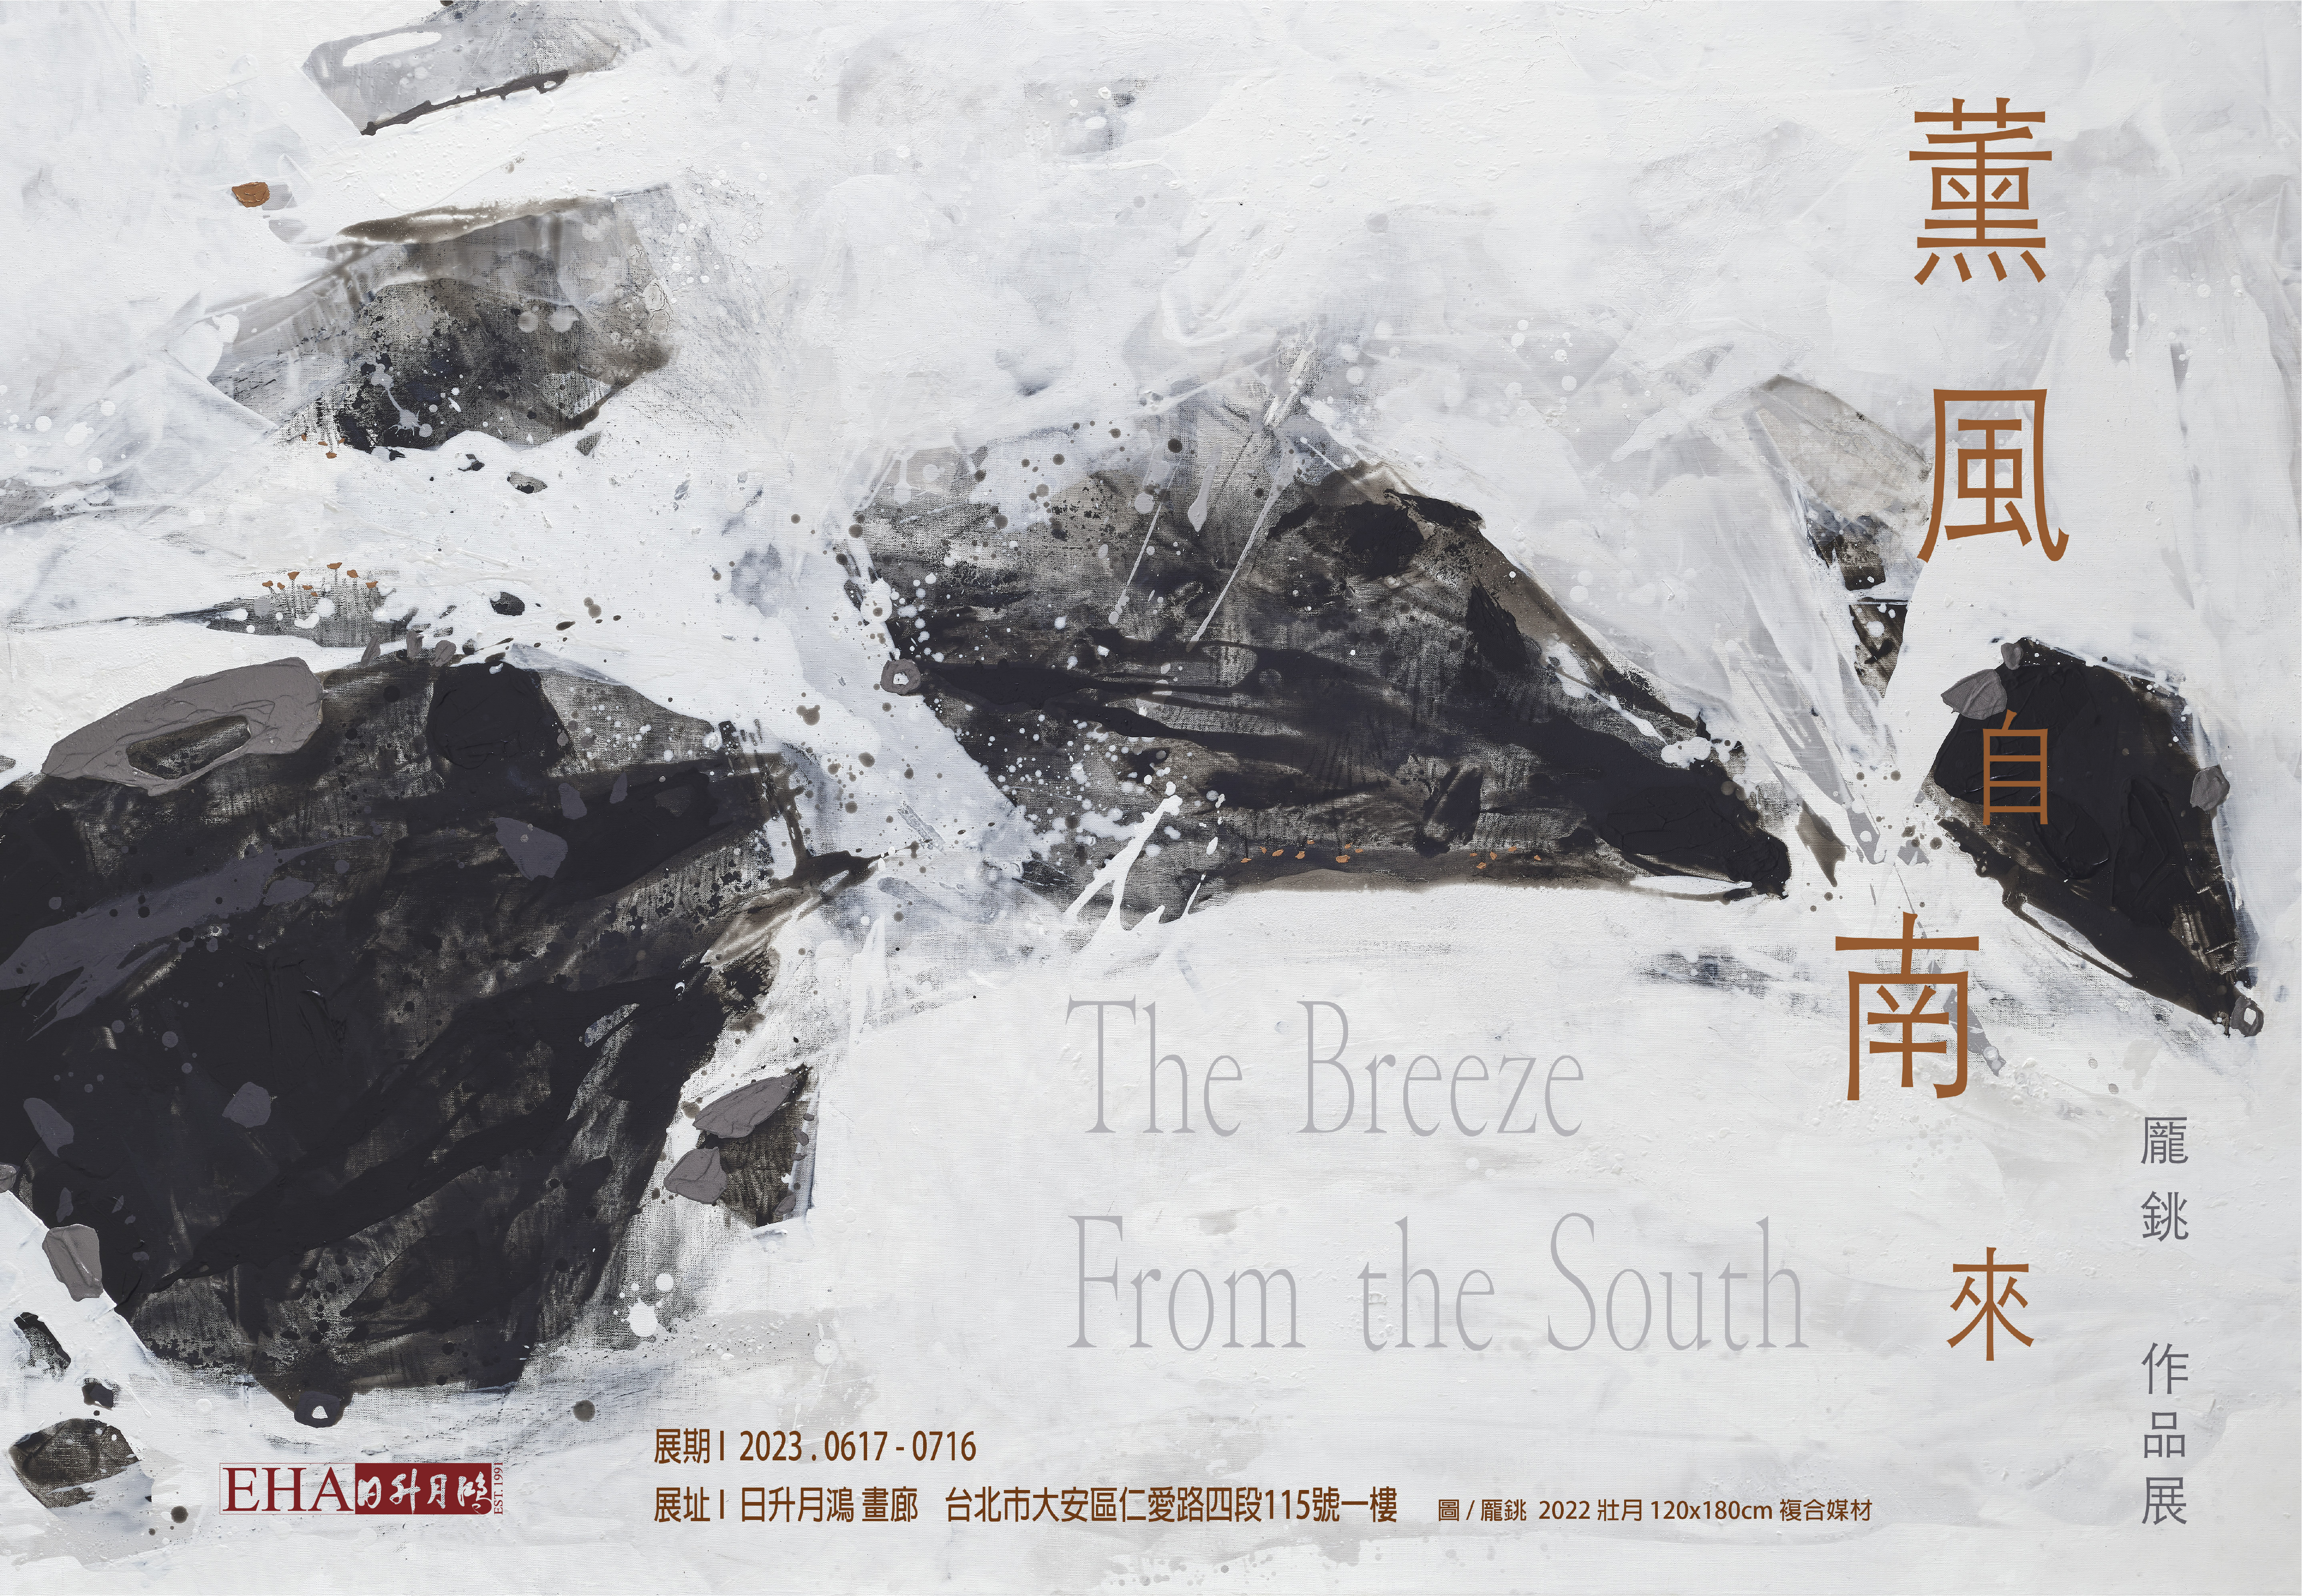 The Breeze from the South by Yolanda Pong